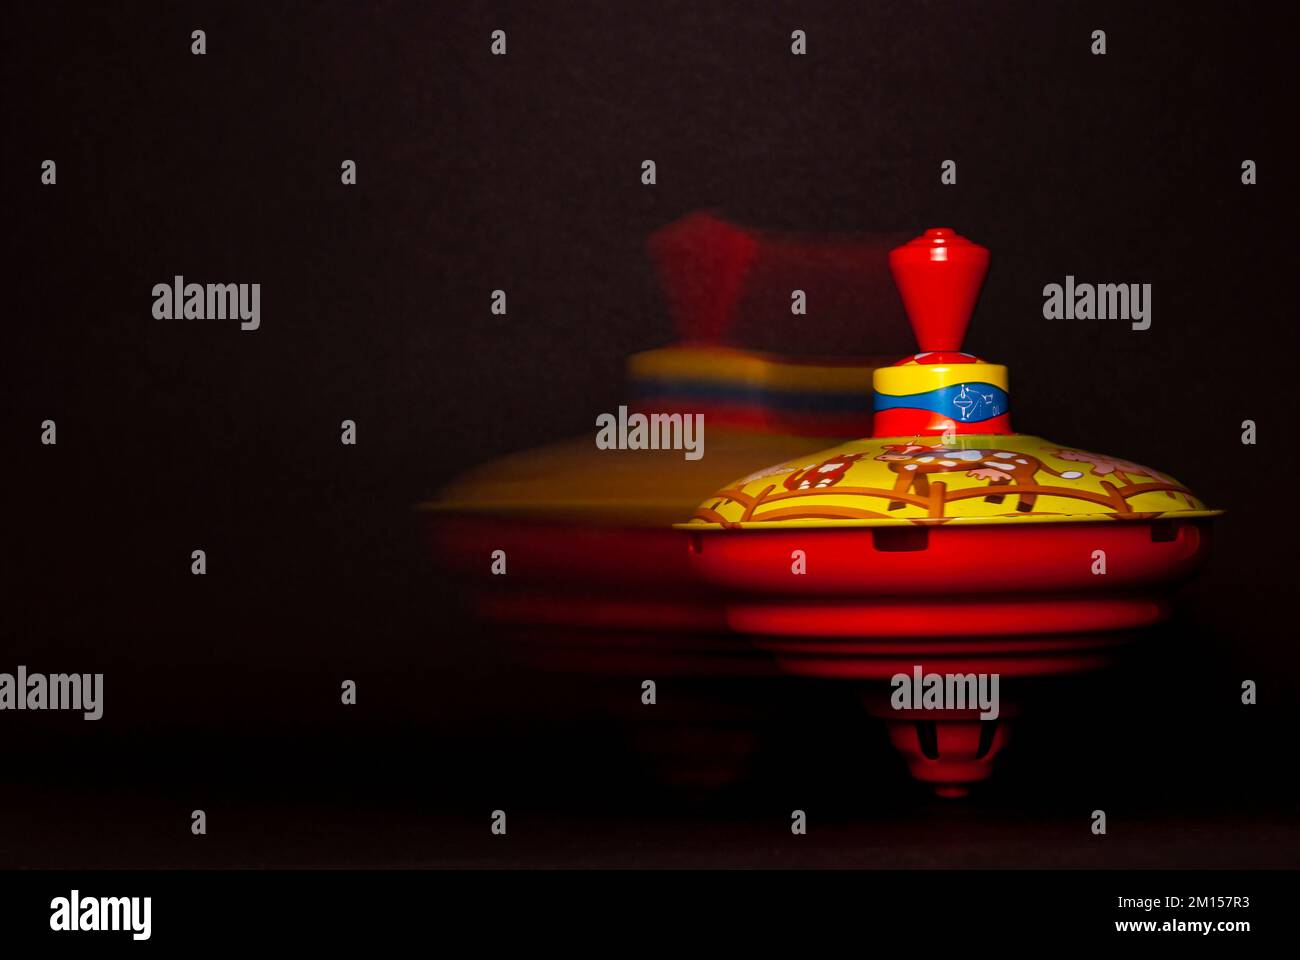 Spinning and moving humming top against a black background, concept of toddler play and toys. Stock Photo